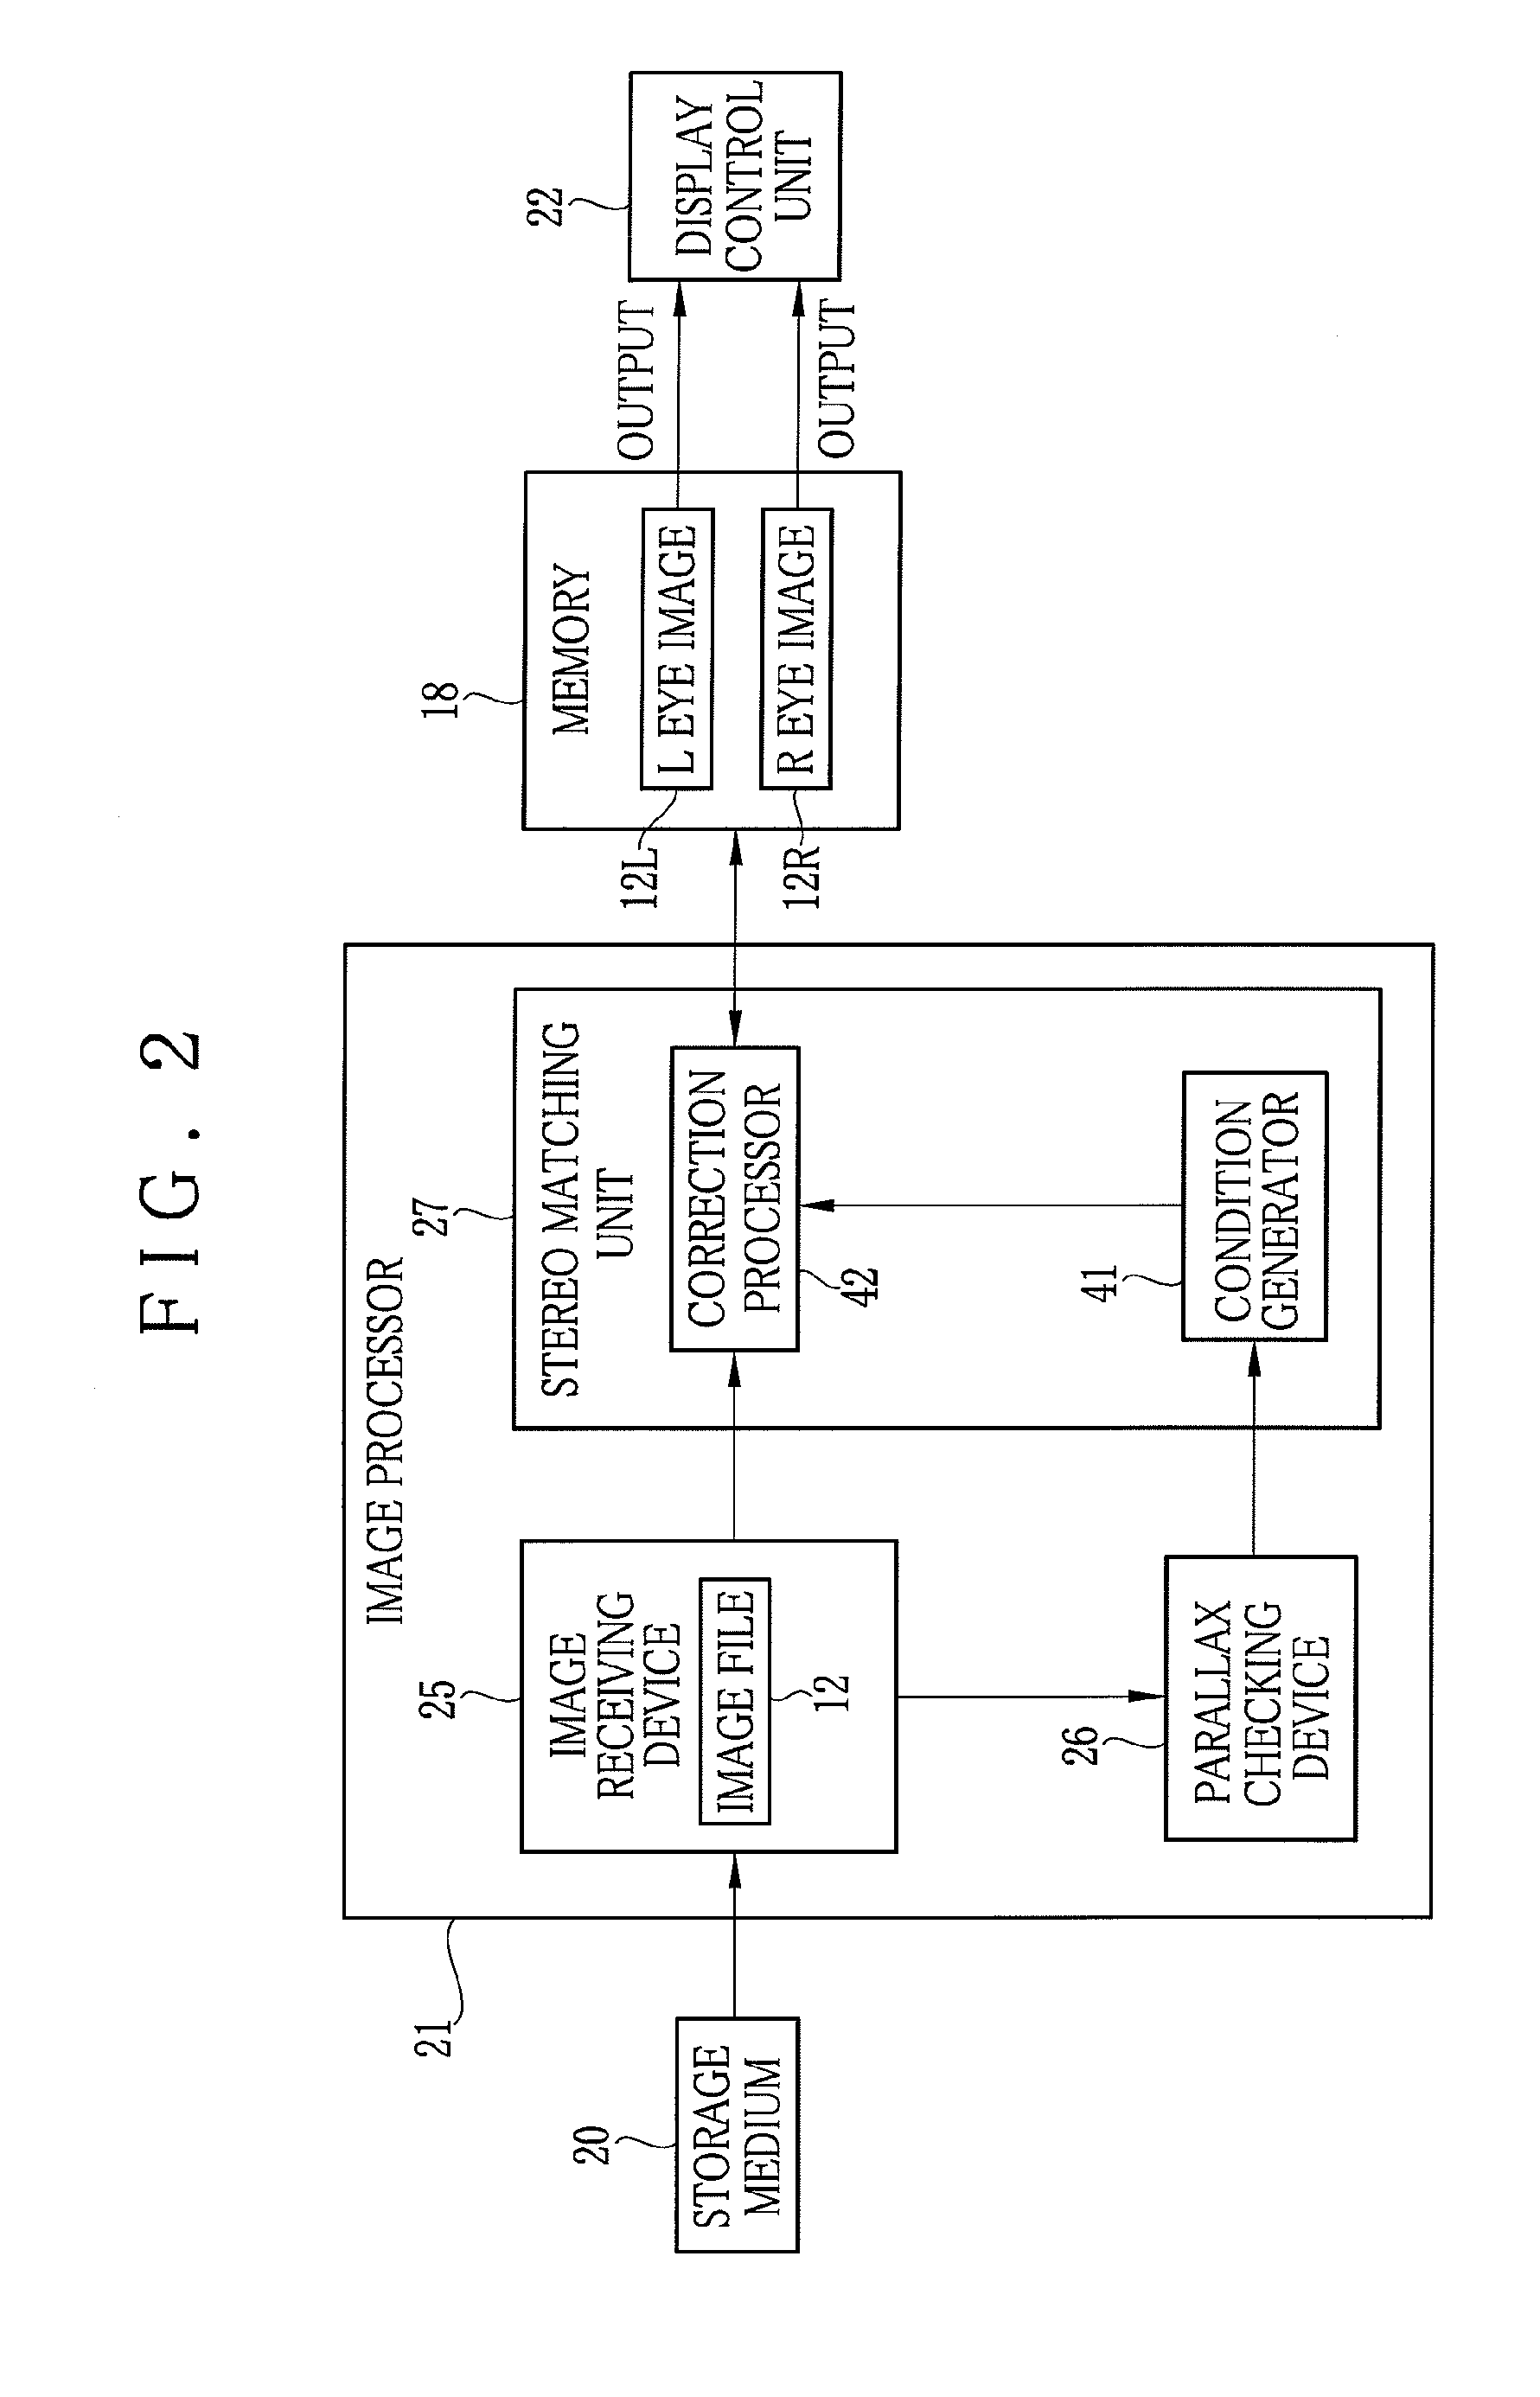 Stereoscopic image display apparatus and changeover method